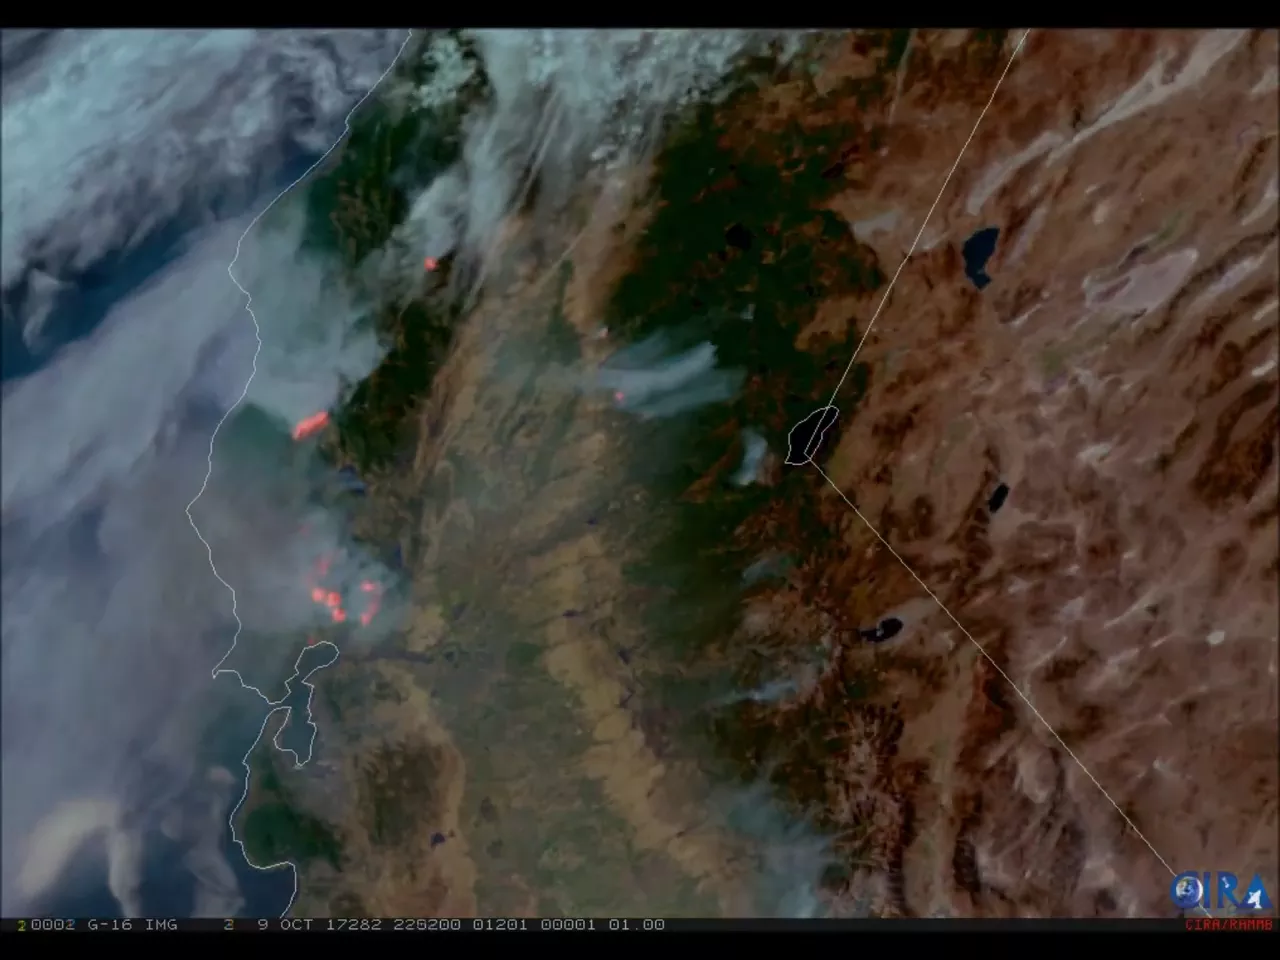 GeoColor imagery from the GOES-16 satellite, of wildfires raging in California on October 9, 2017. 